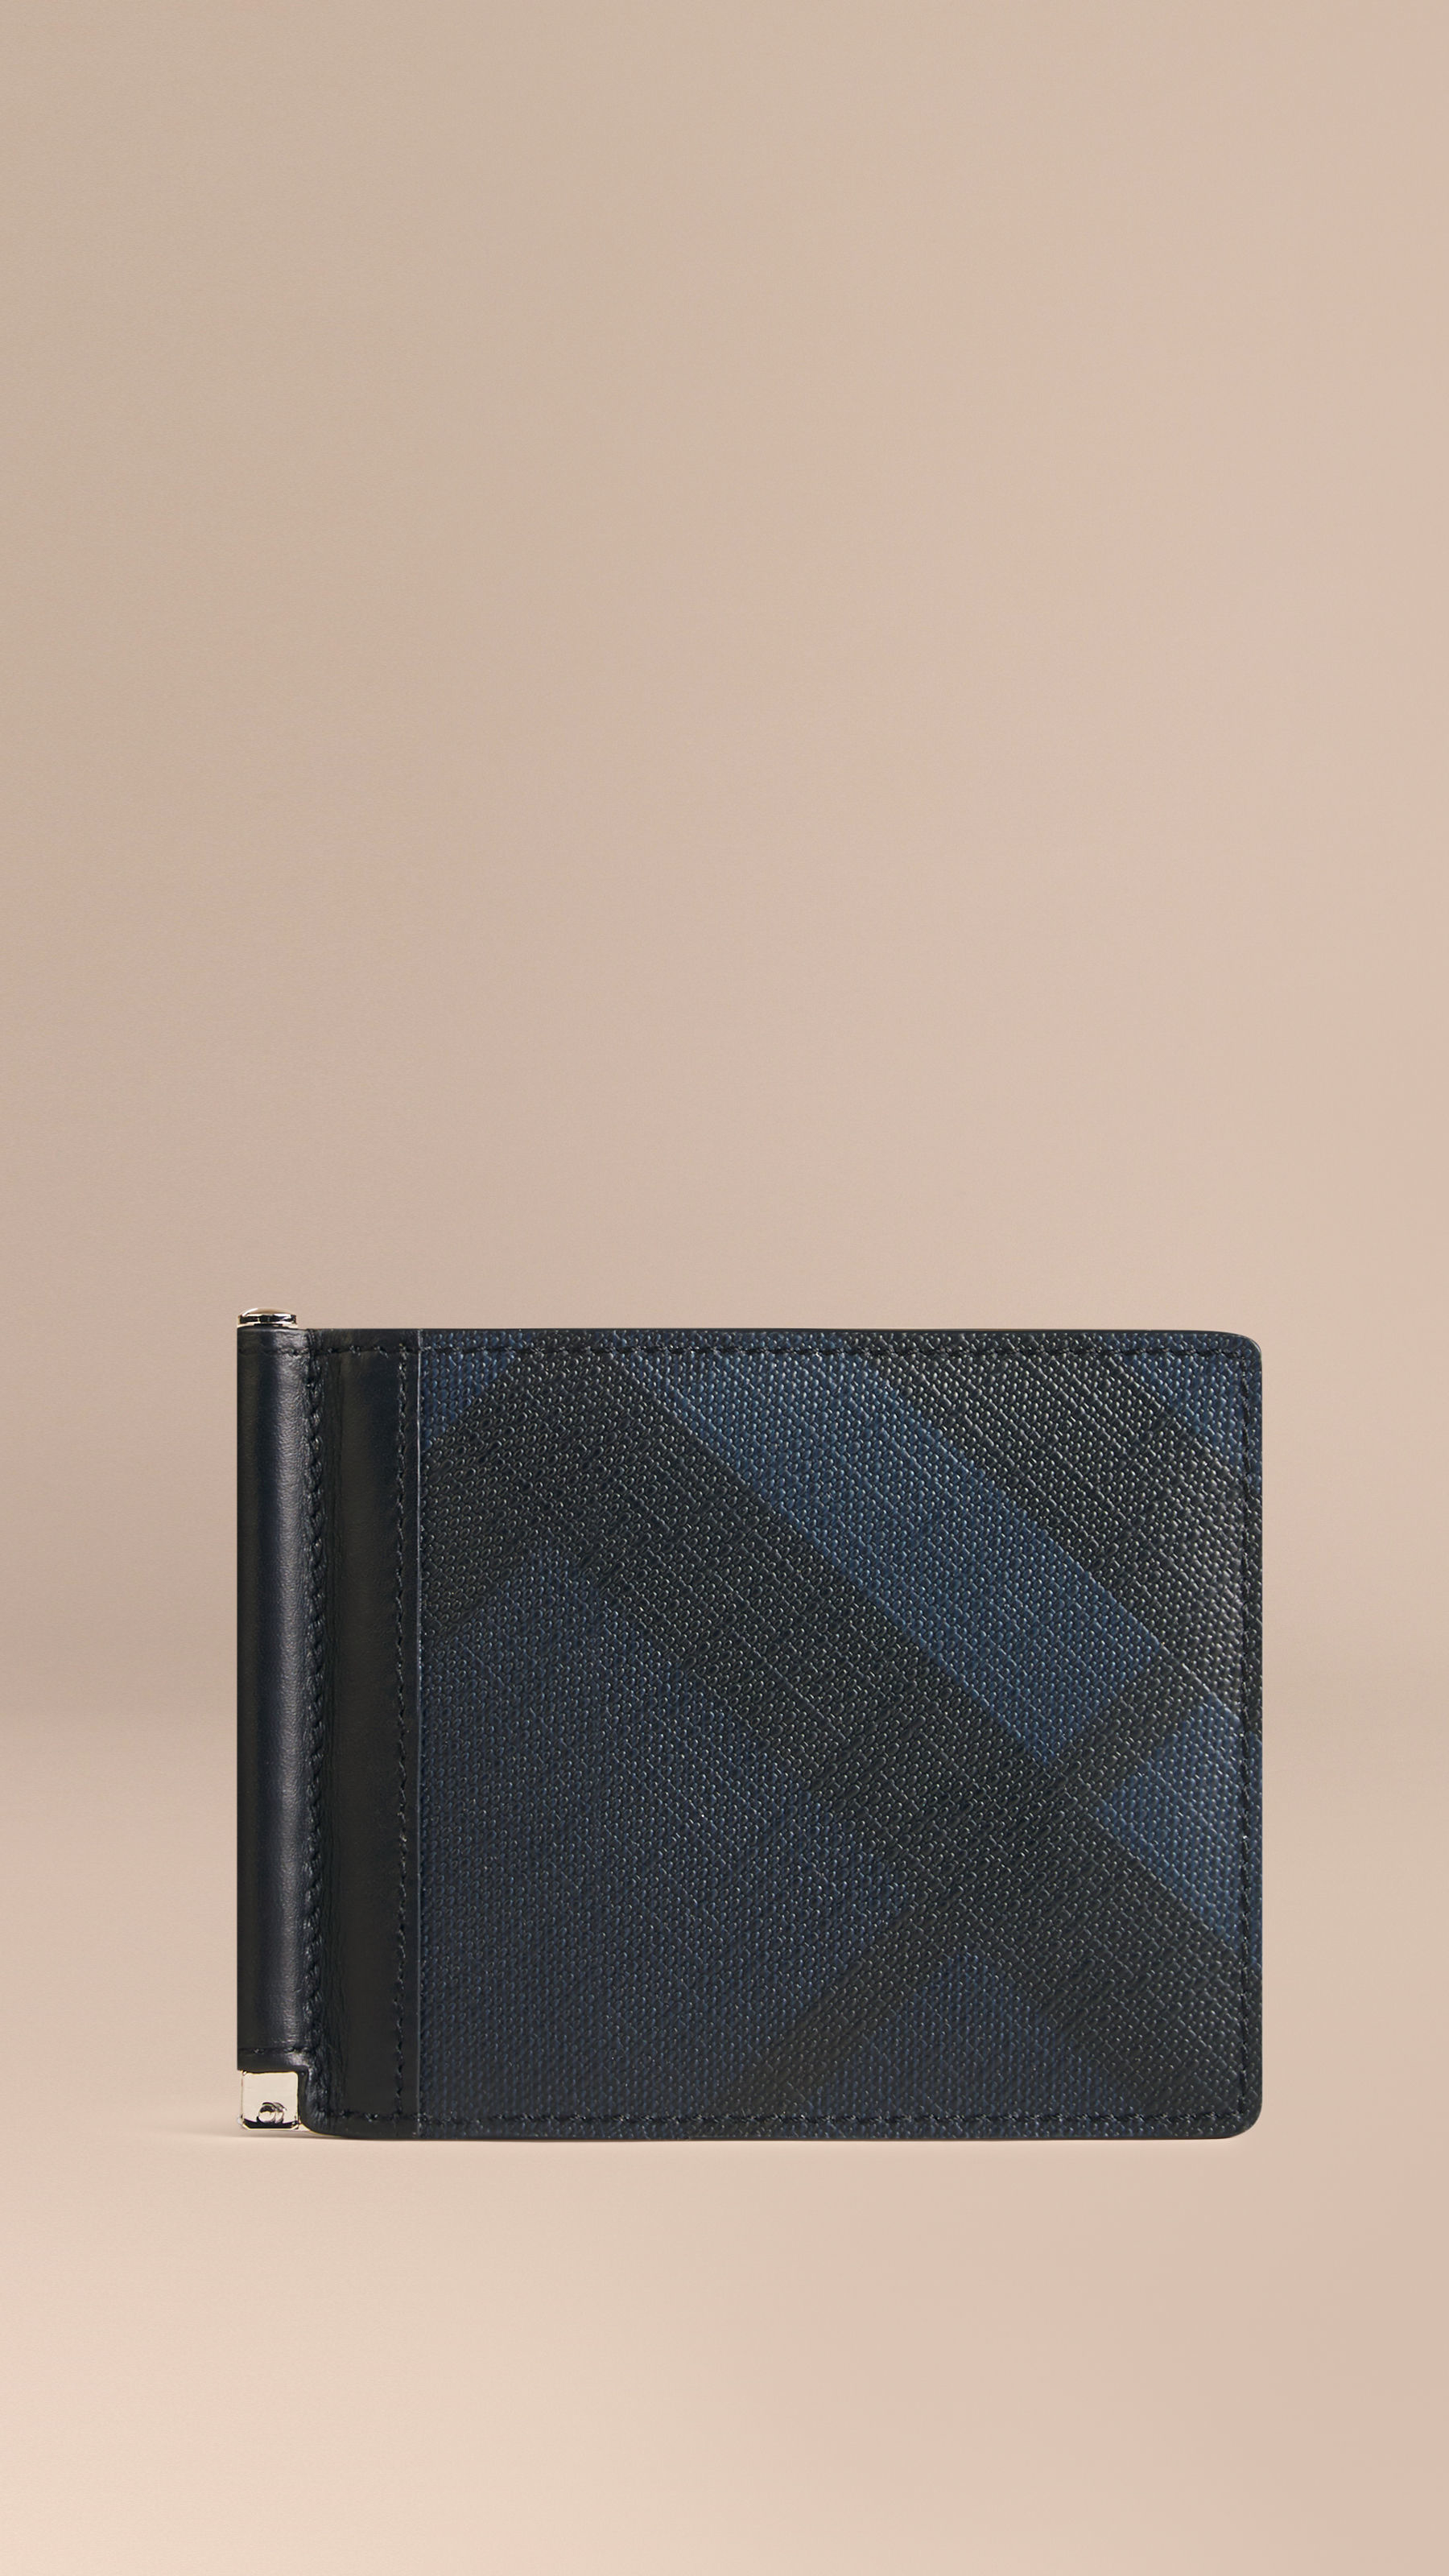 Burberry Synthetic Check Money Clip Wallet Navy/black in Blue for Men - Lyst